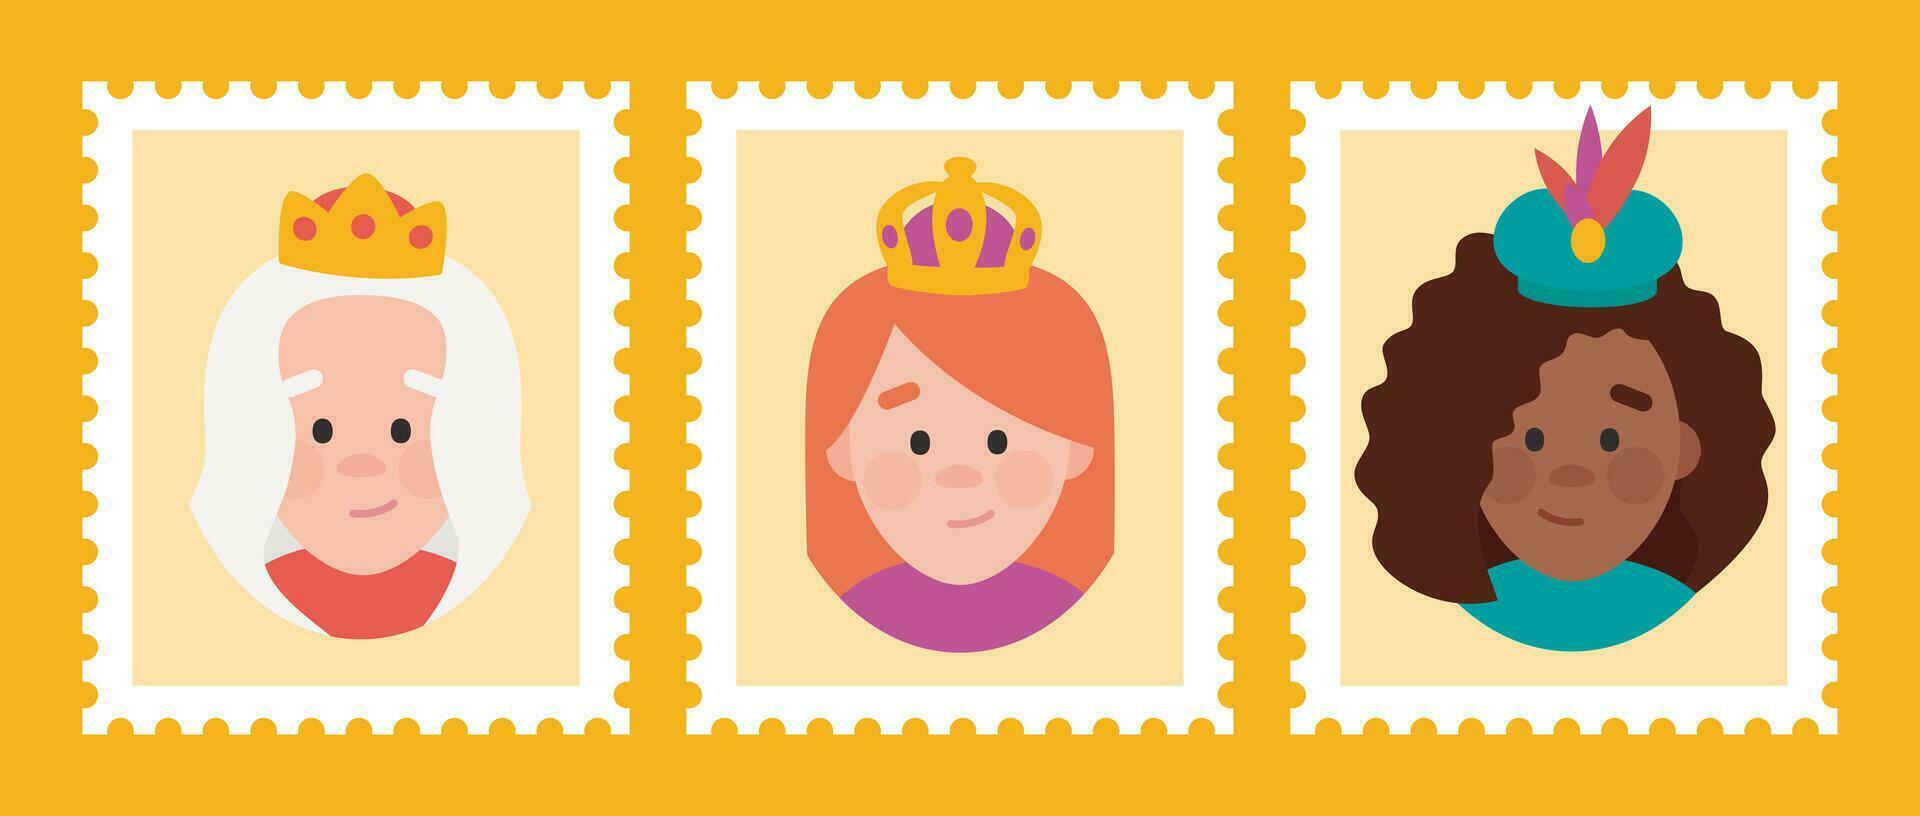 Funny yellow Stamps packs of the wise women. The three Queen of orient, Melchiora, Gasparda and Balthazara vector